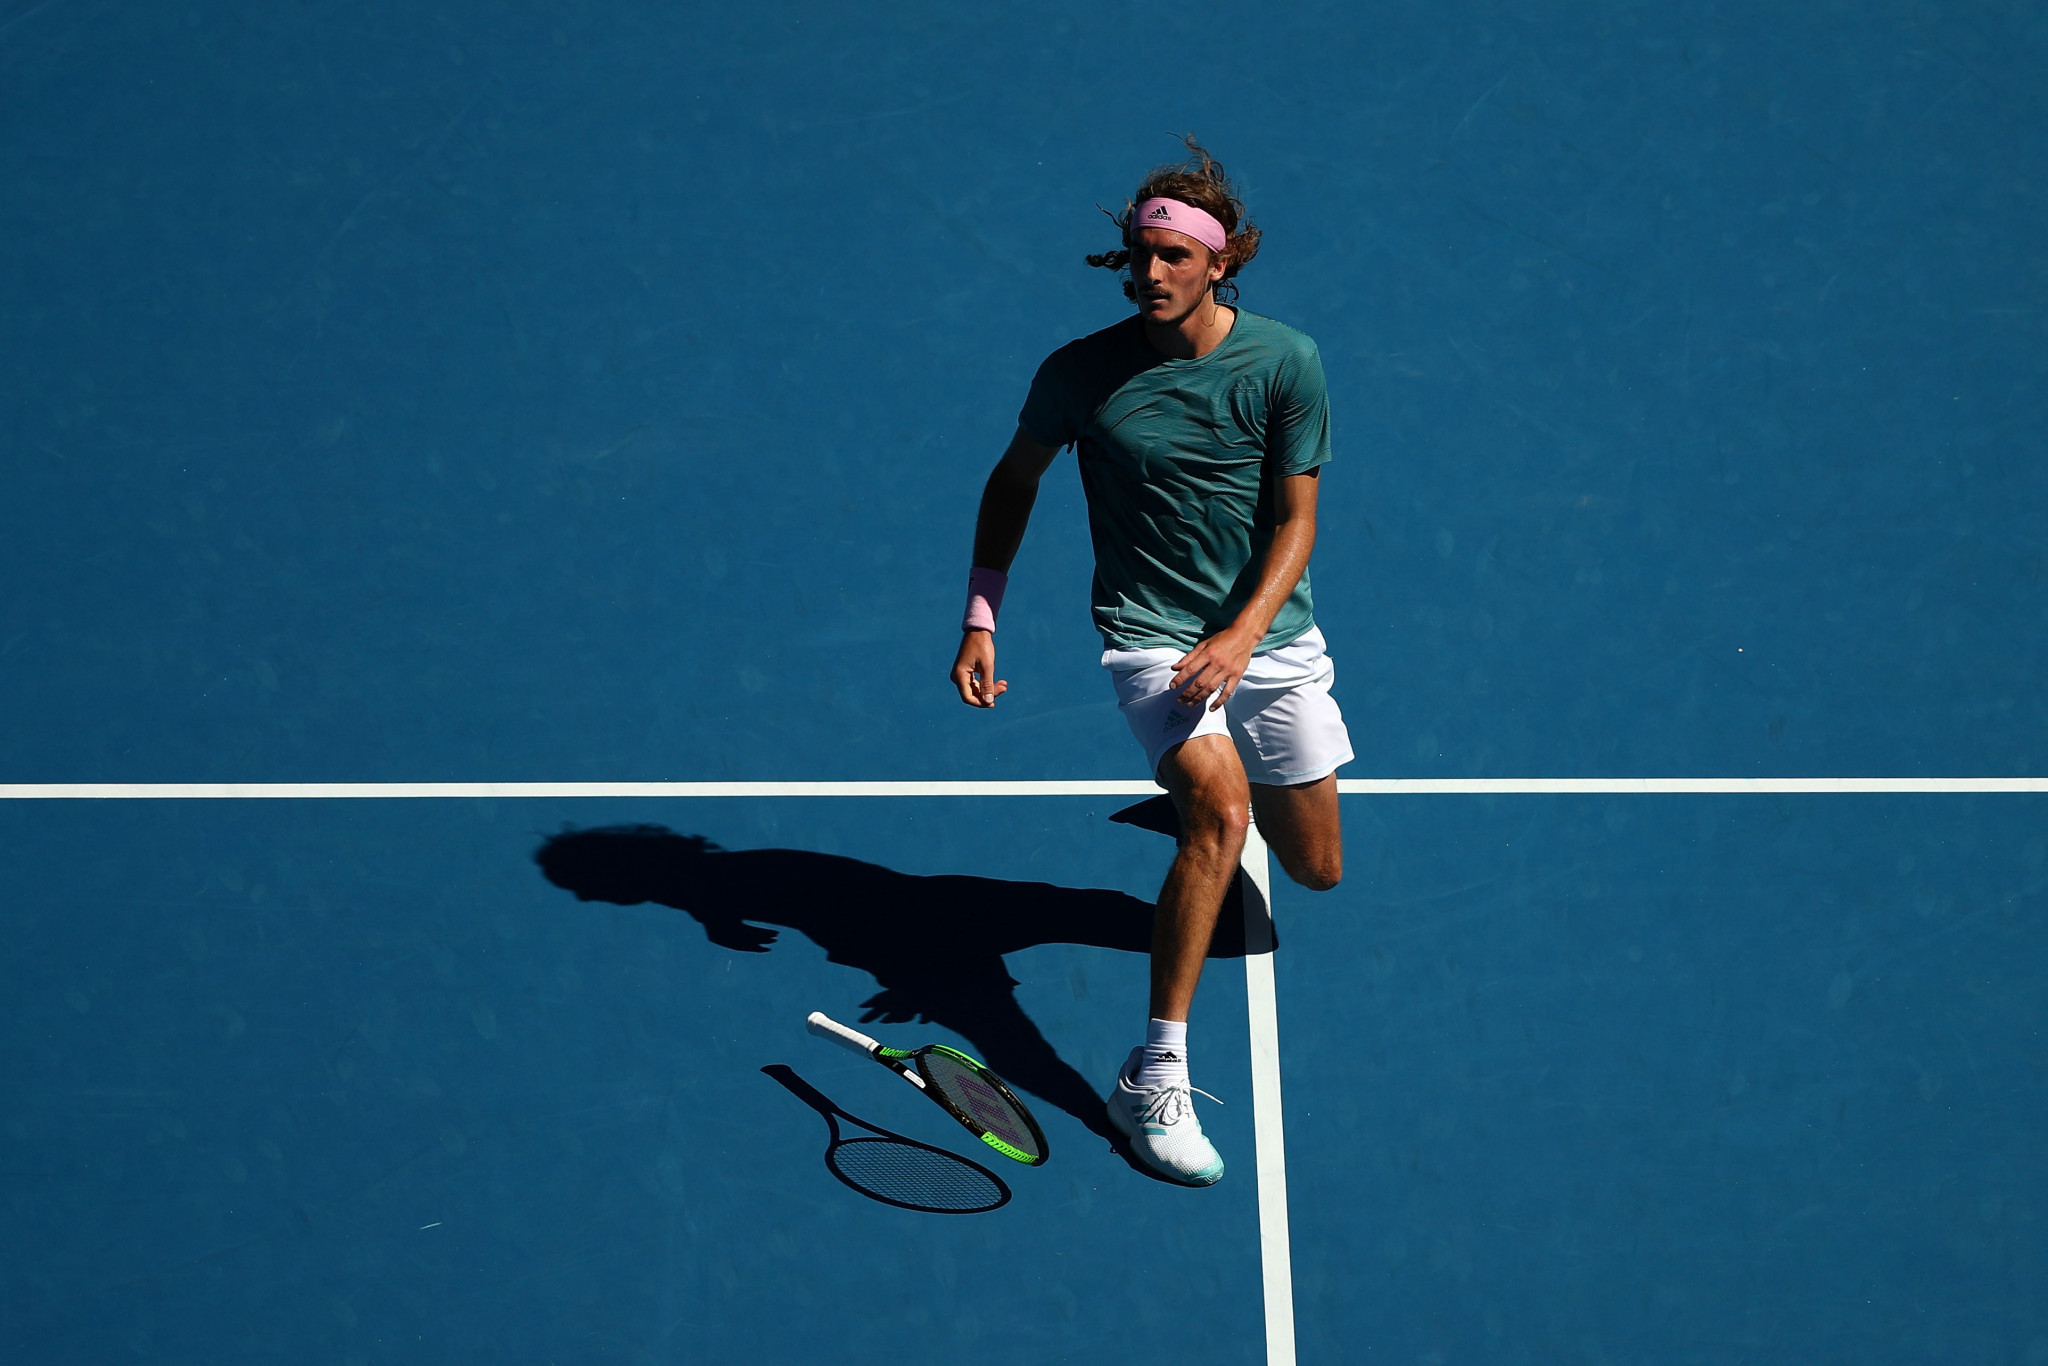 Greece's Stefanos Tsitsipas became the youngest men's Grand Slam semi-finalist since 2007 ©Getty Images